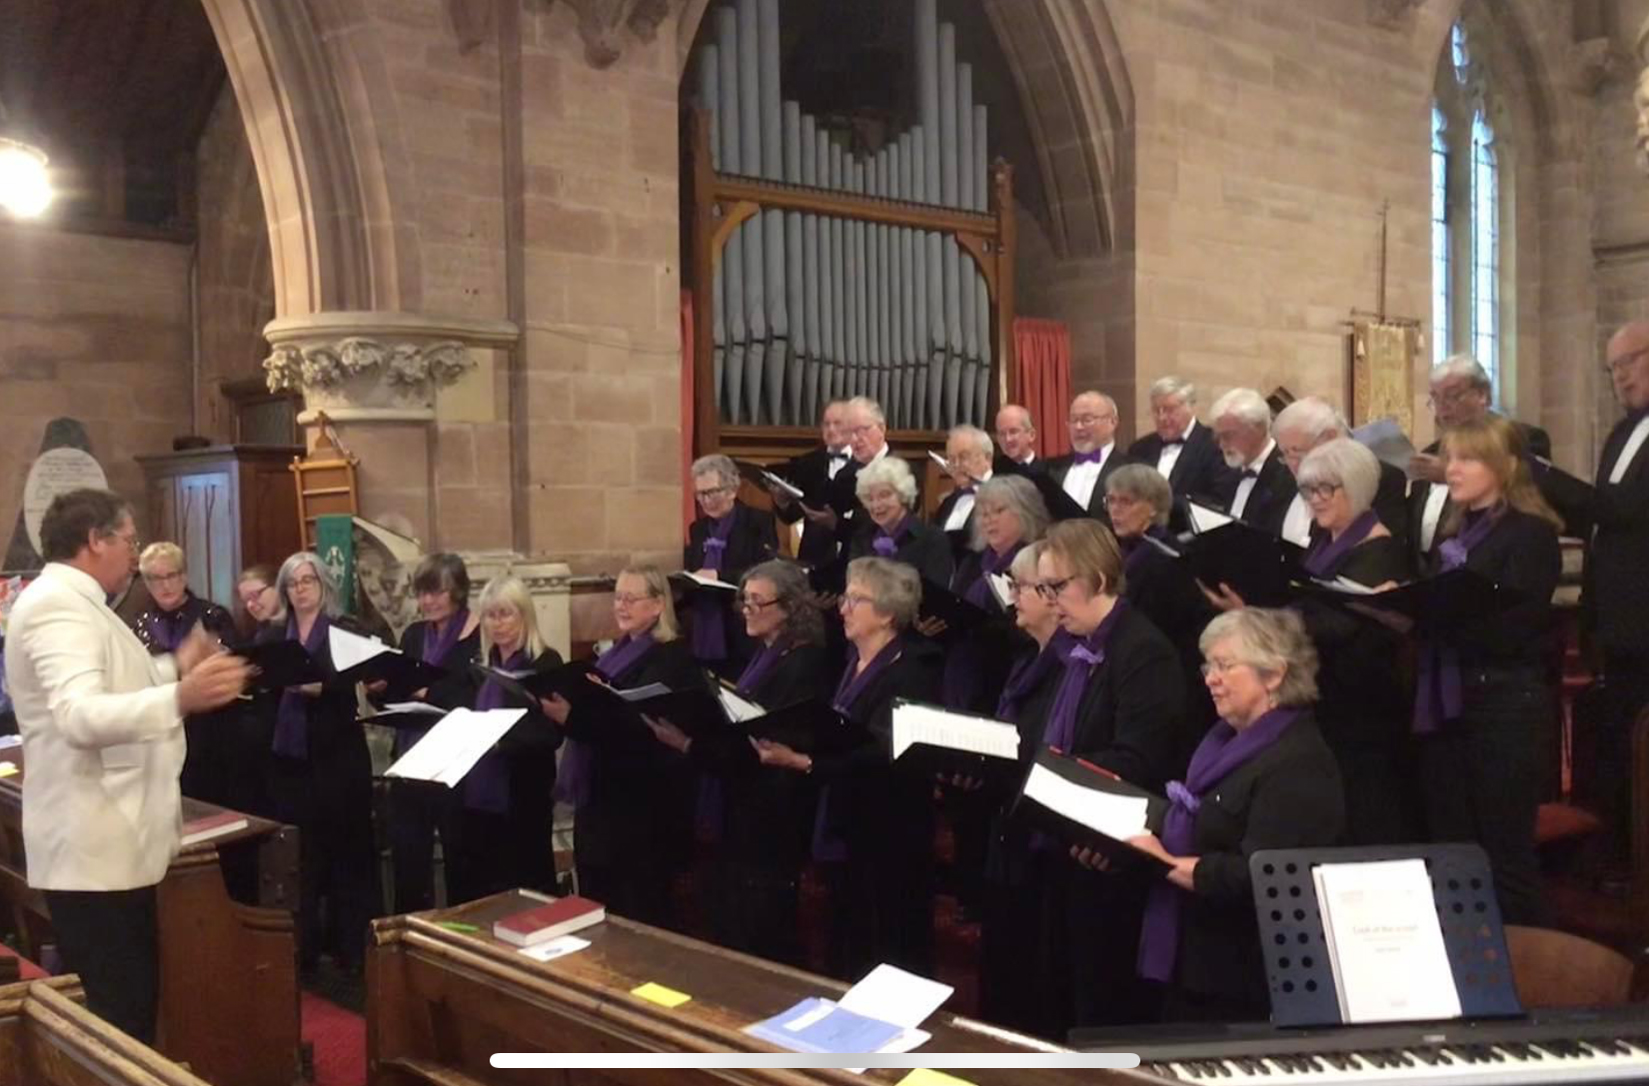 The Oakville Singers performing in Hallow Church